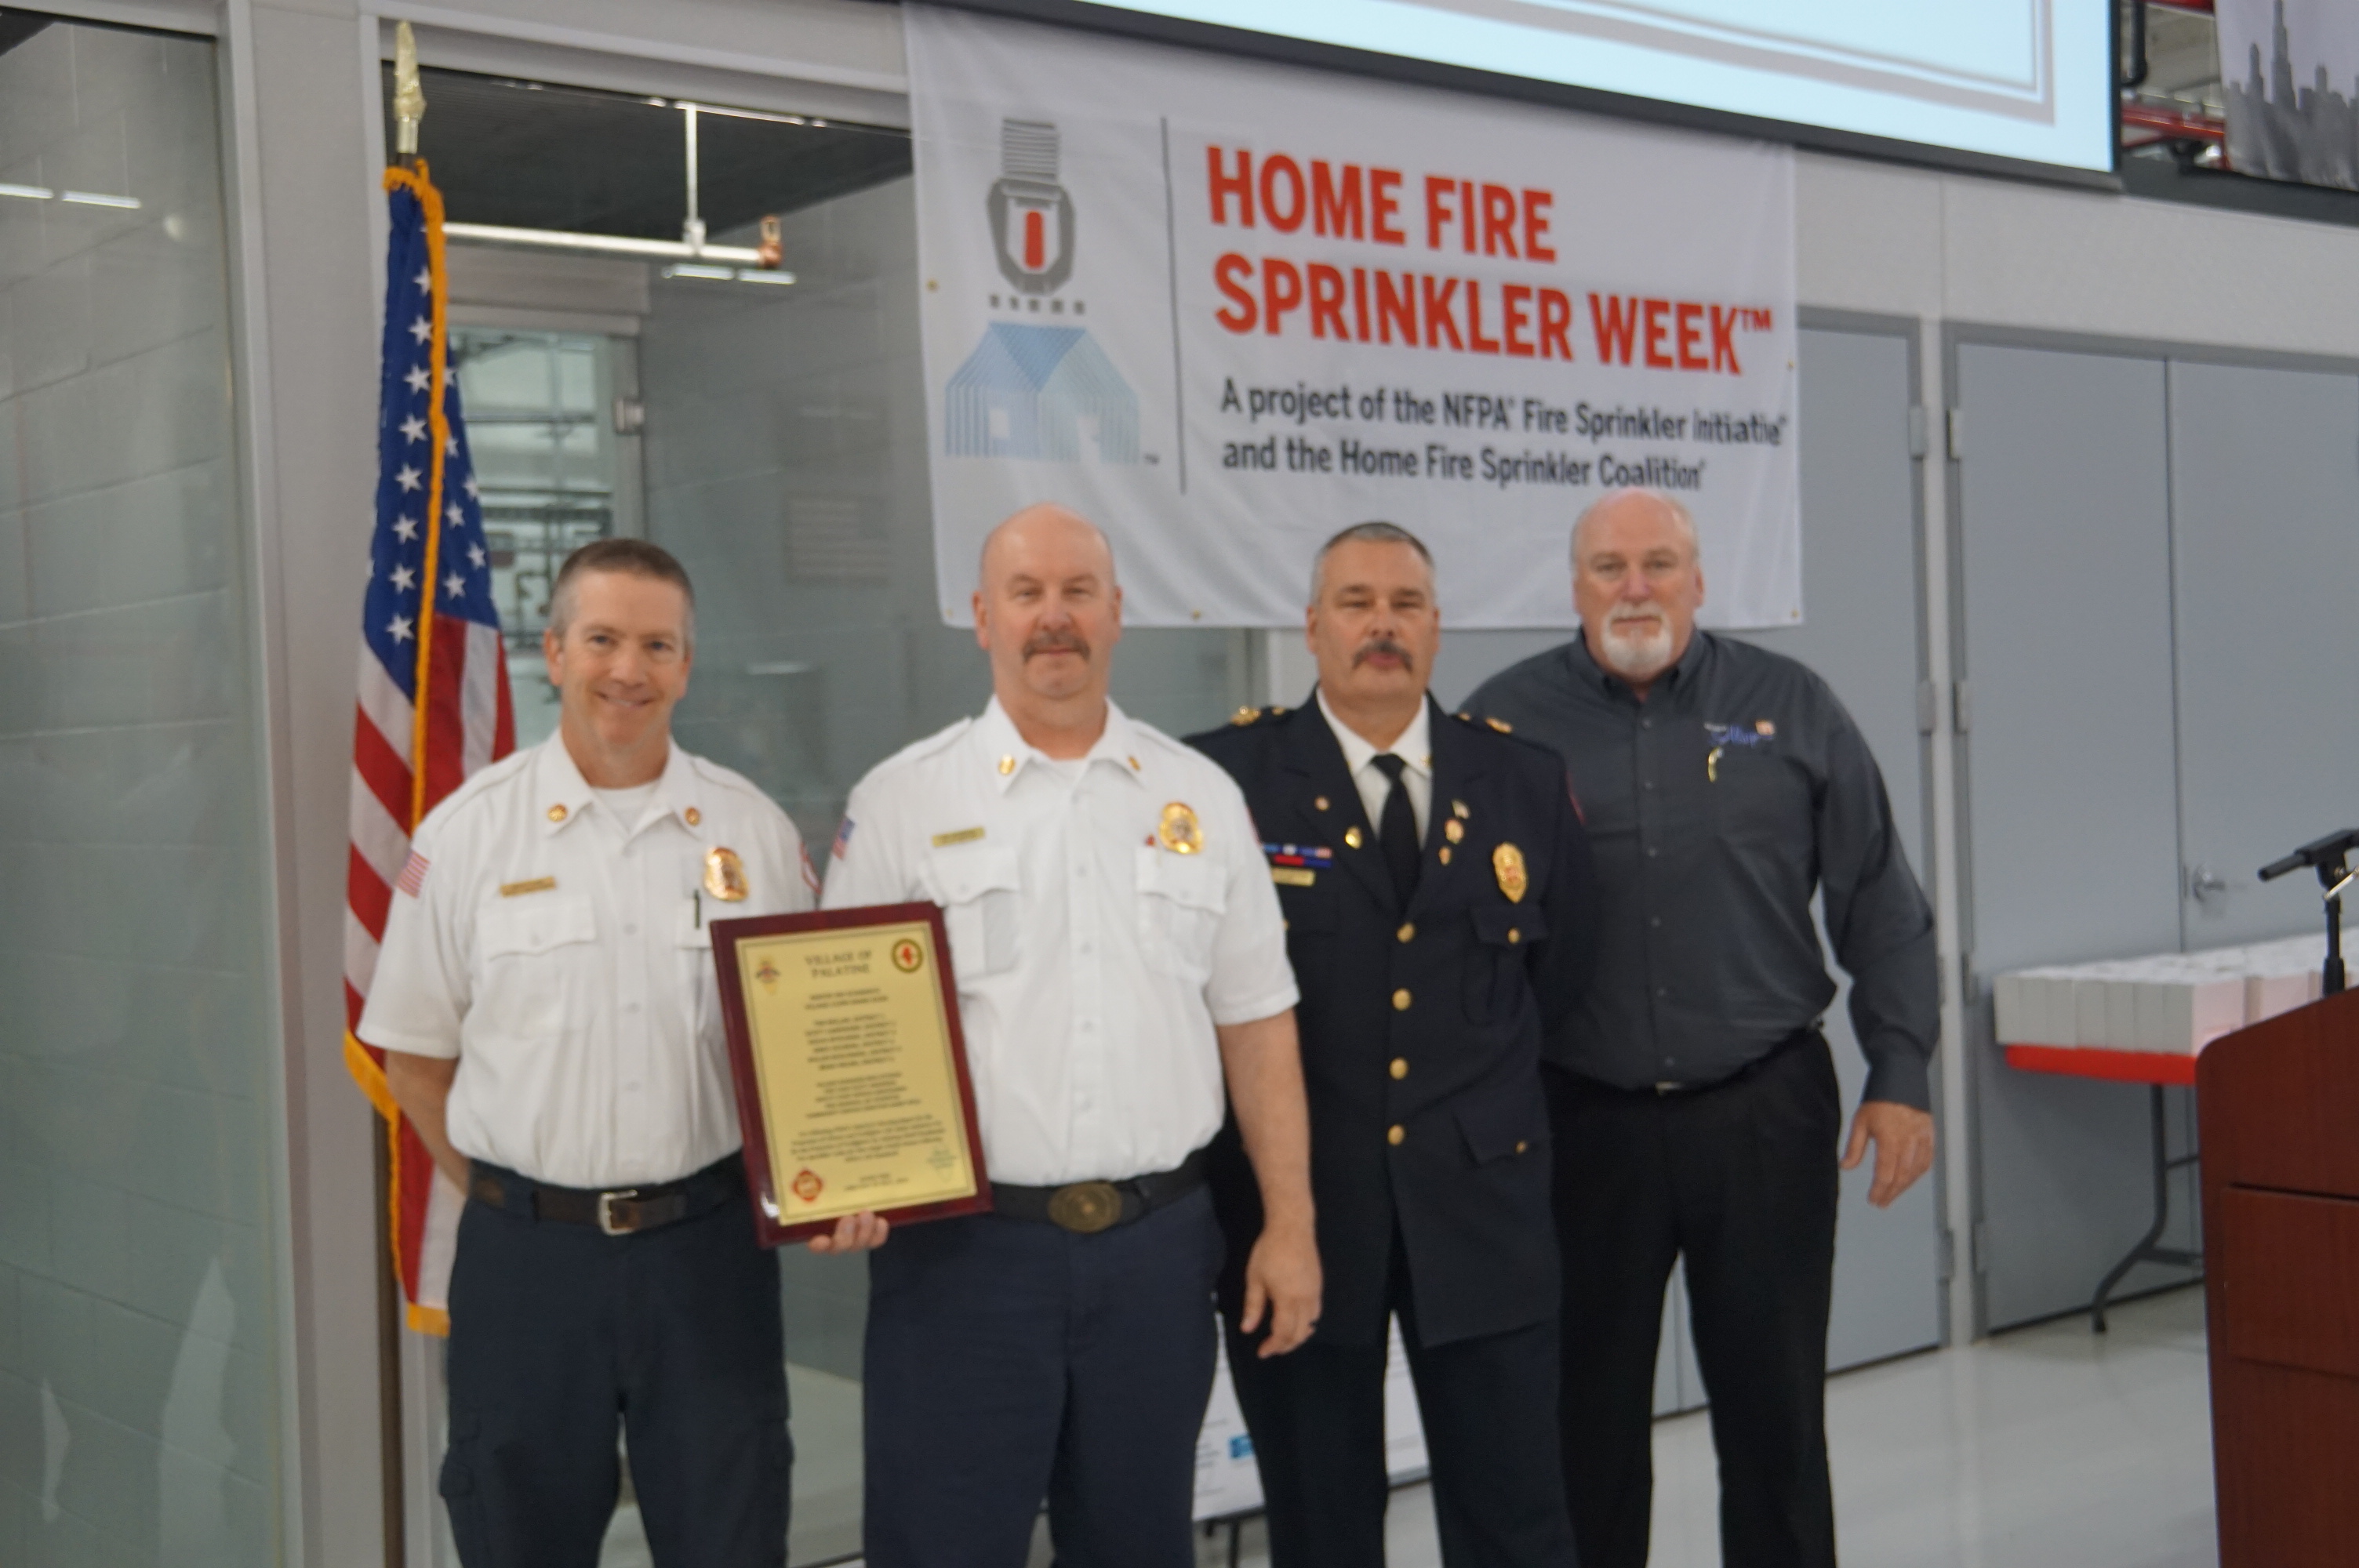 Palatine Fire Department recognition award presented to Chief of Administration Scott Mackeben and Fire Marshal Jay Atherton by Alsip Fire Chief Tom Styczynski and Alsip Mayor John Ryan.